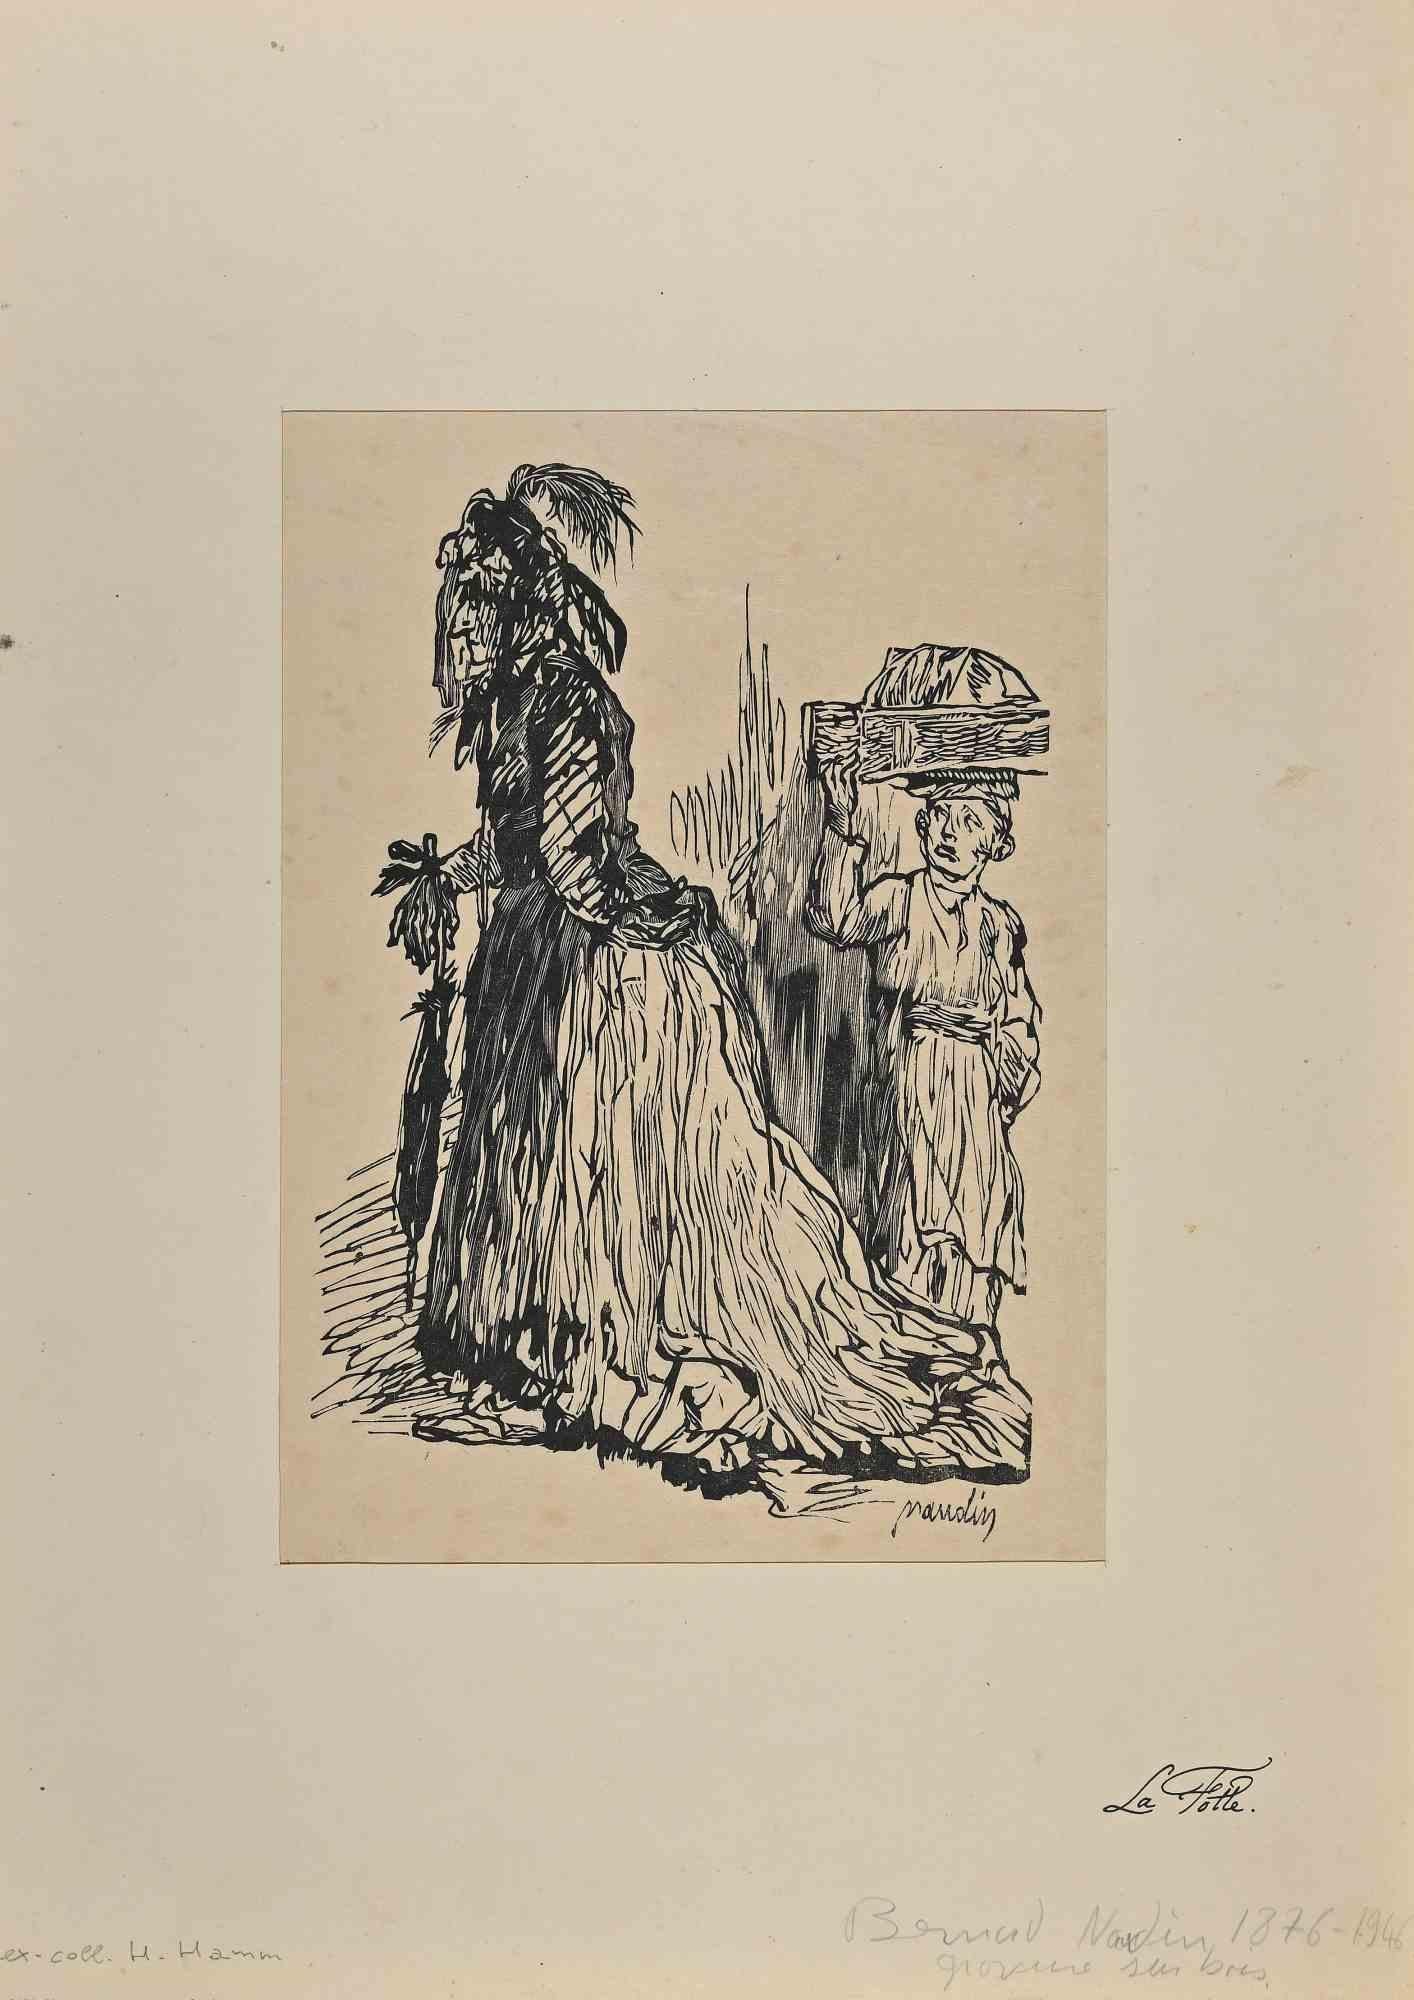 Two Figures is an Original woodcut print realized by Bernard Naudin (1876-1946).

The artwork is in good condition on a yellowed paper, included a cream colored cardboard passpartout (44x31.5 cm).

Hand-signed by the artist on the lower right